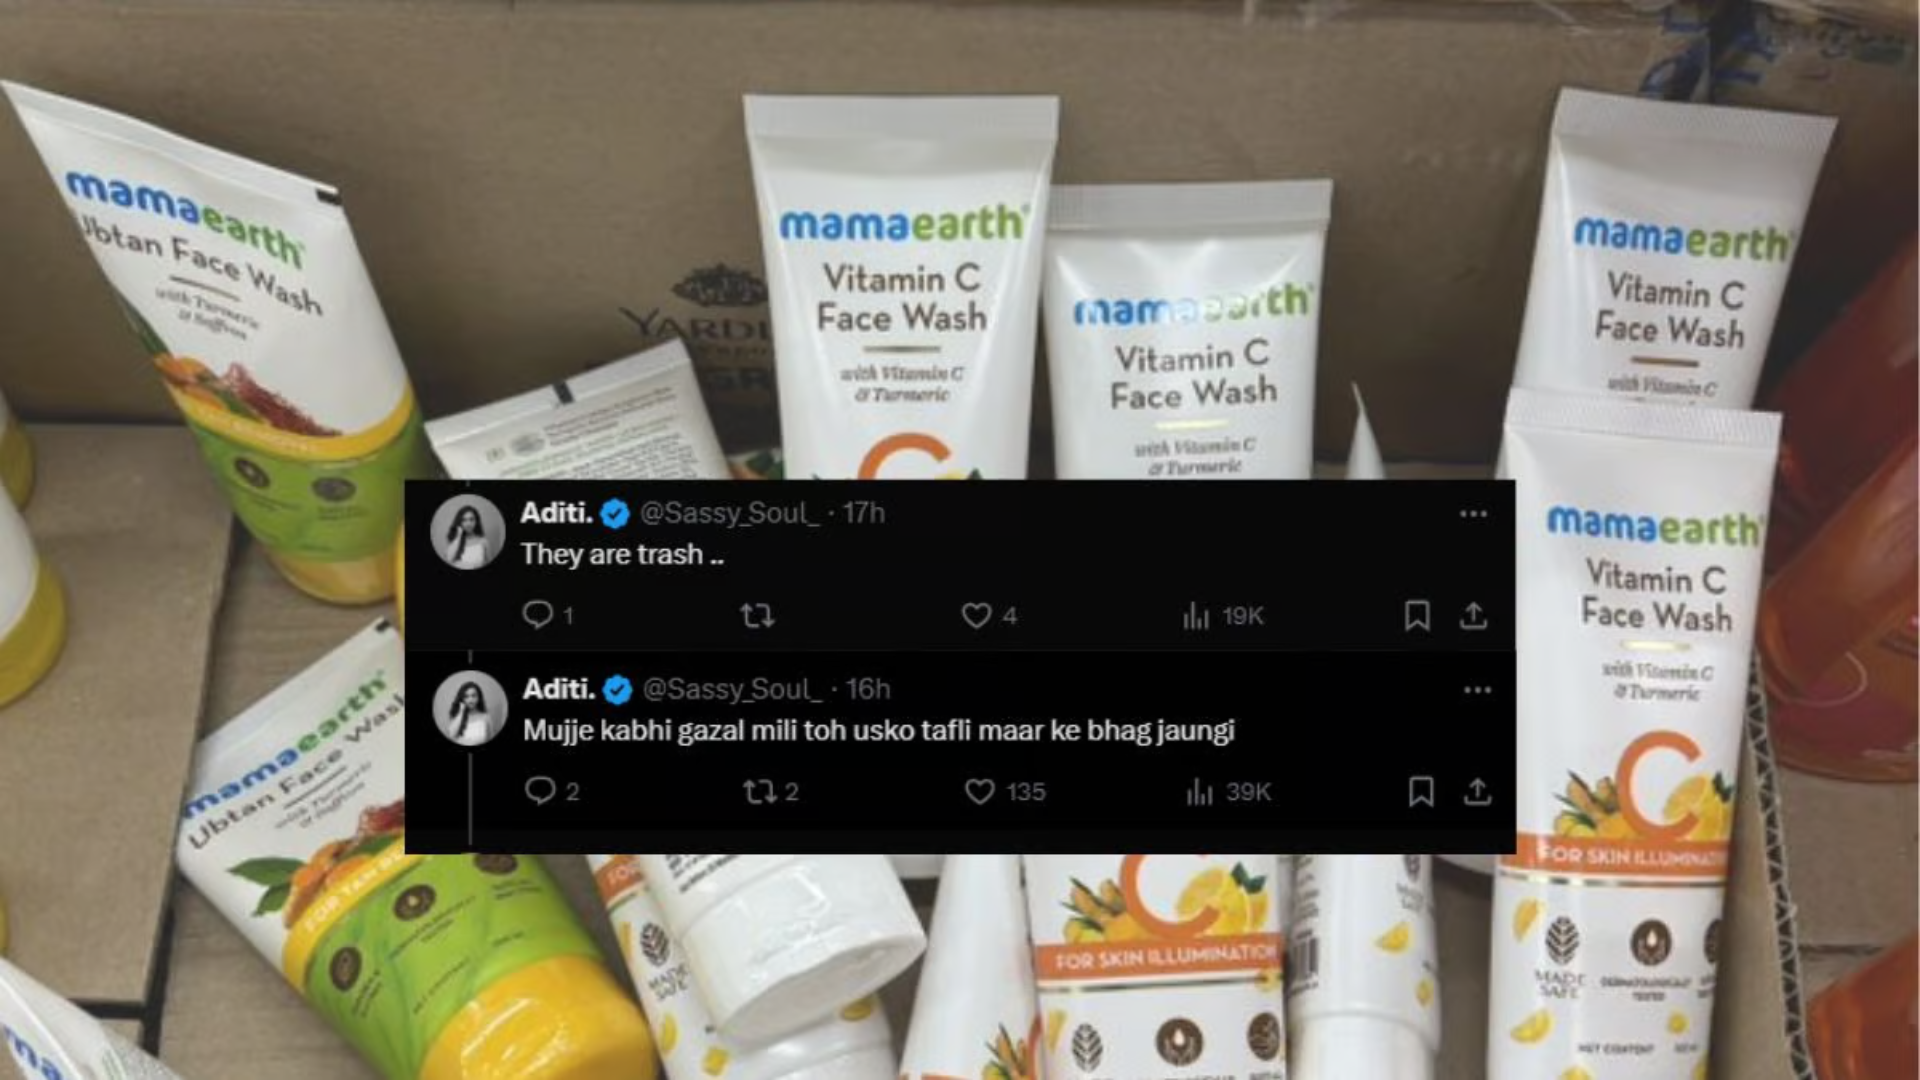 This X User Asks People To Throw Mamaearth Products In Dustbin: Here's What Founder Ghazal Alagh Responded